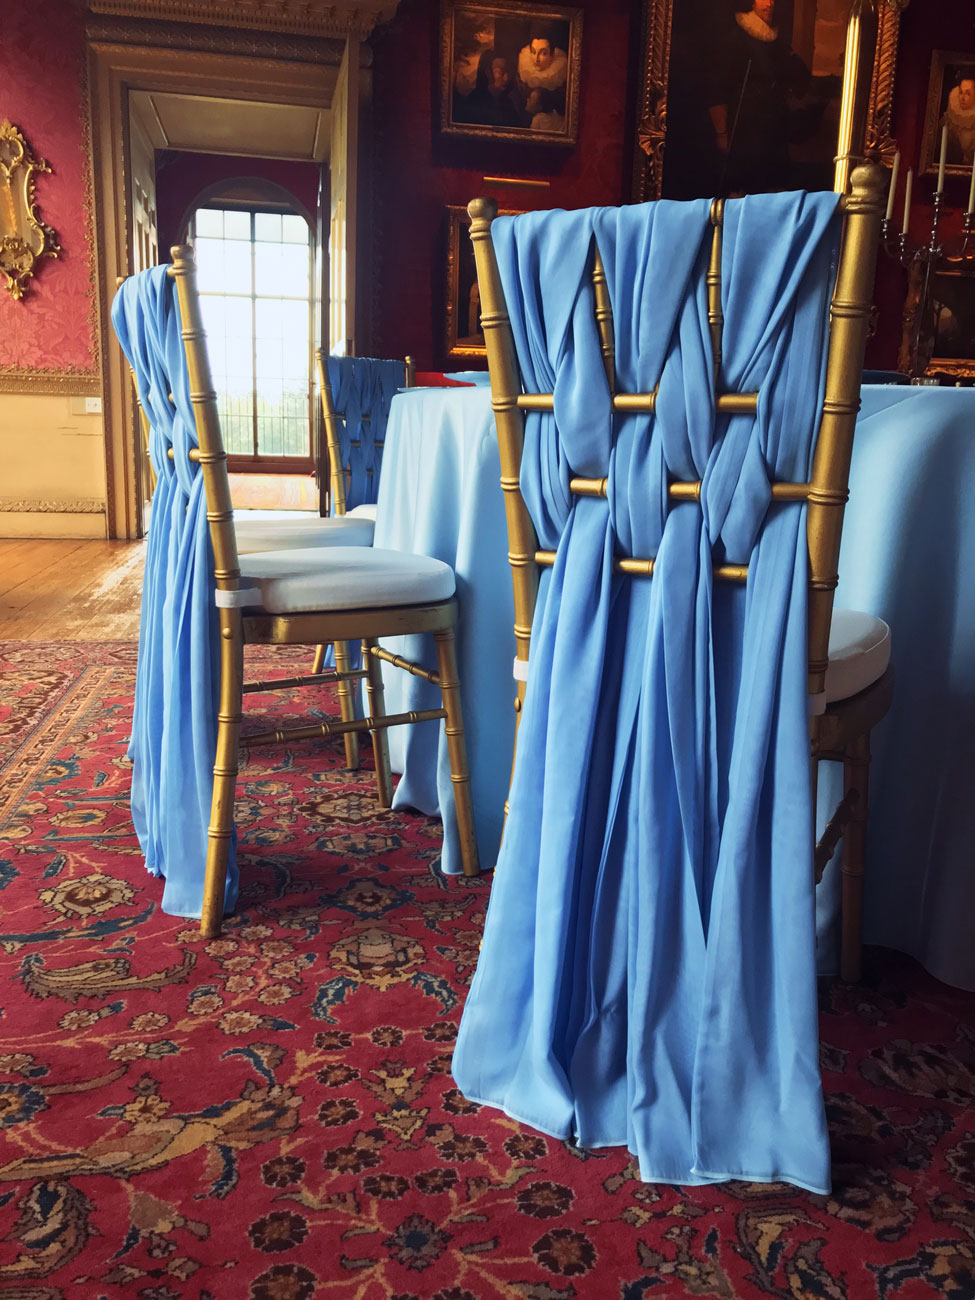 Powder Blue Verona table linen, Gold Chiavari Chairs with White Essential seat pads and Powder Blue Santina Weaves at Hopetoun House